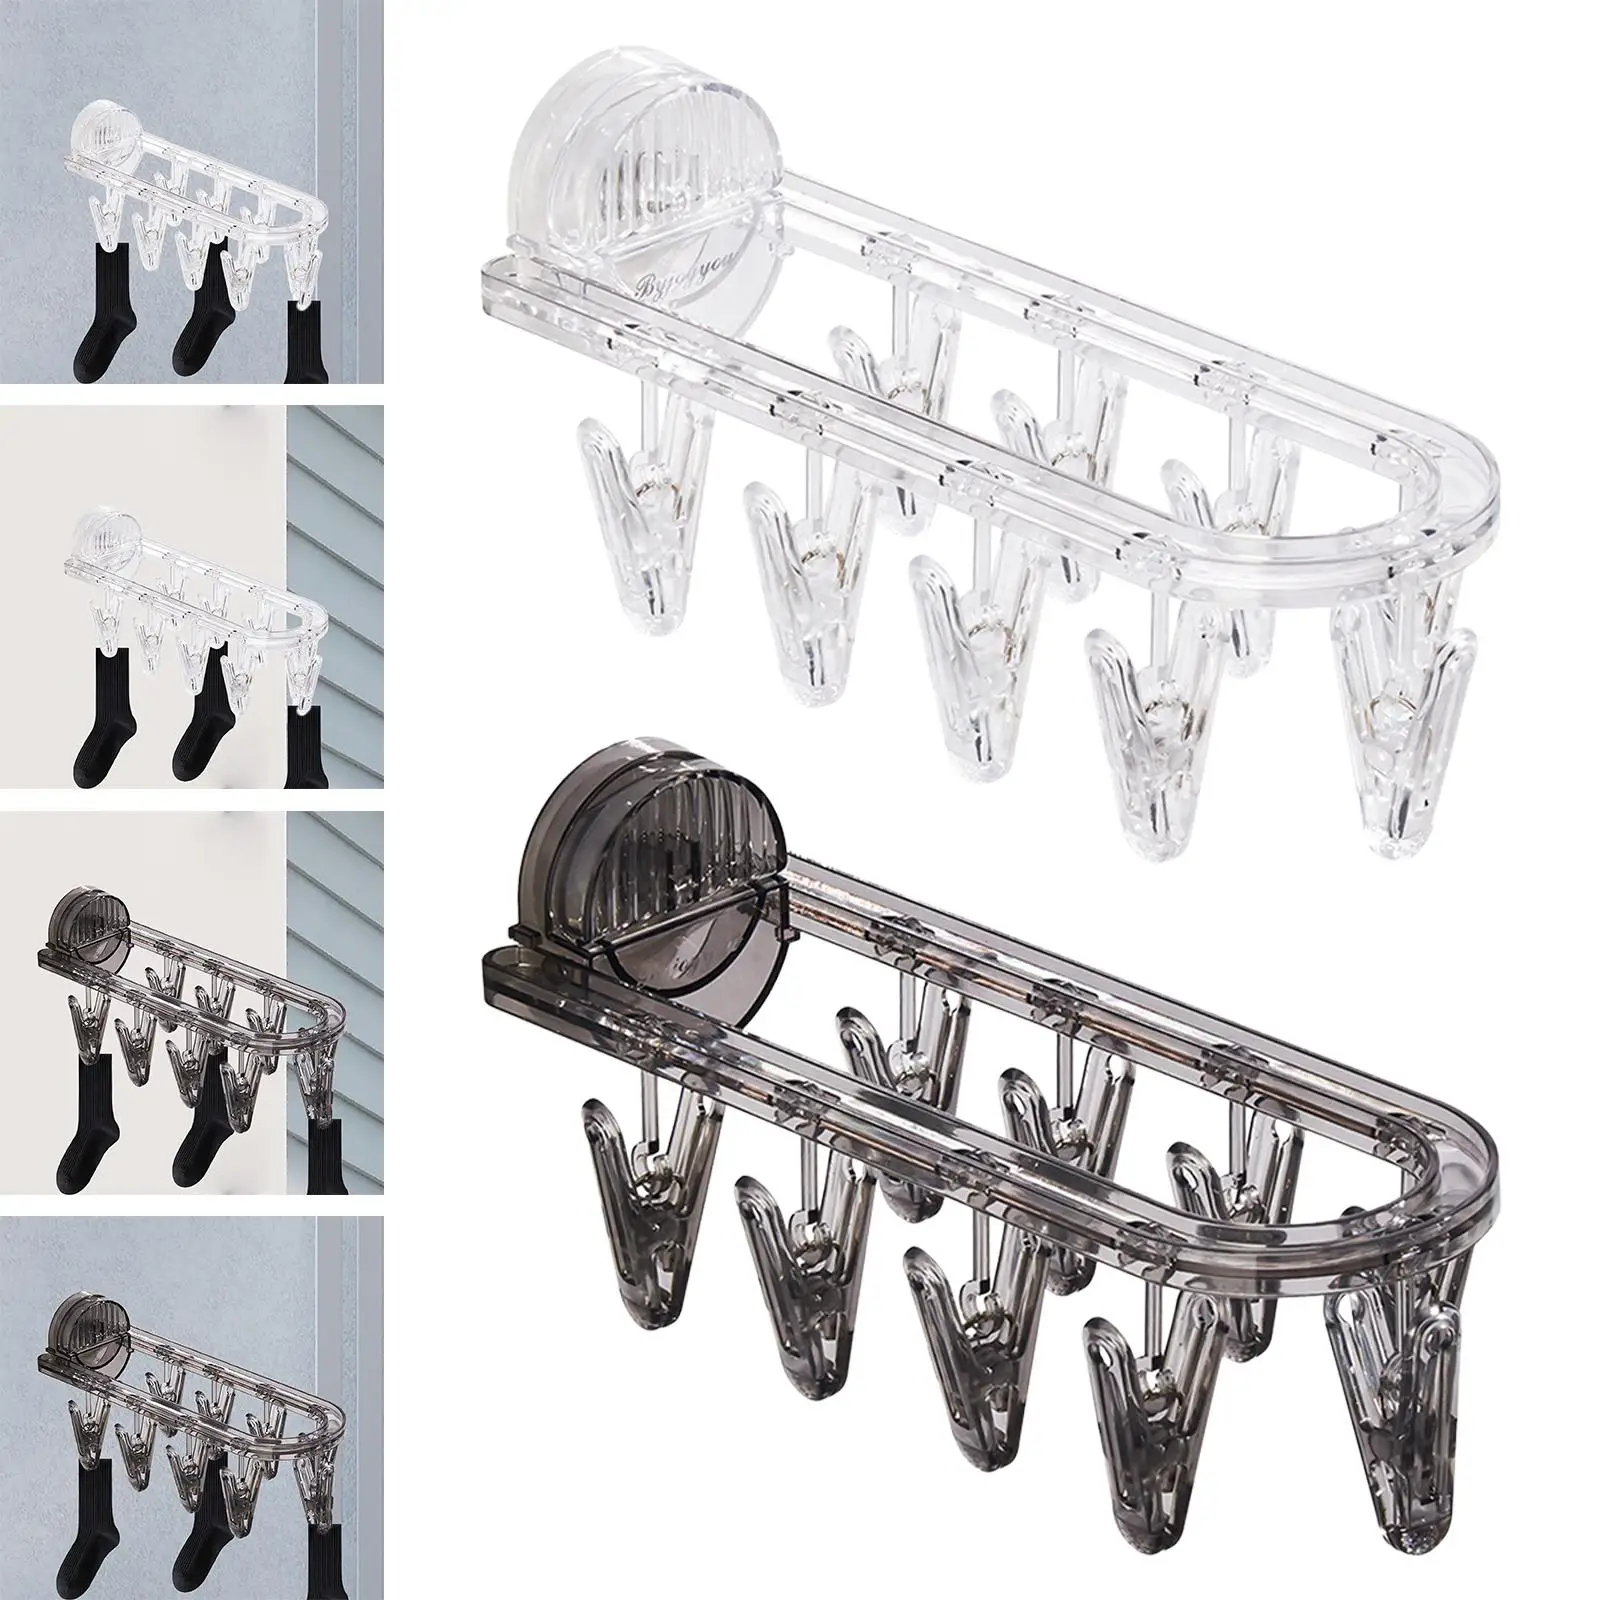 Foldable Clothes Drying Racks Drying Rack Clothes Organizer with 9 Clips Drip Drying Hanger for Baby Clothes Socks Towels Hat